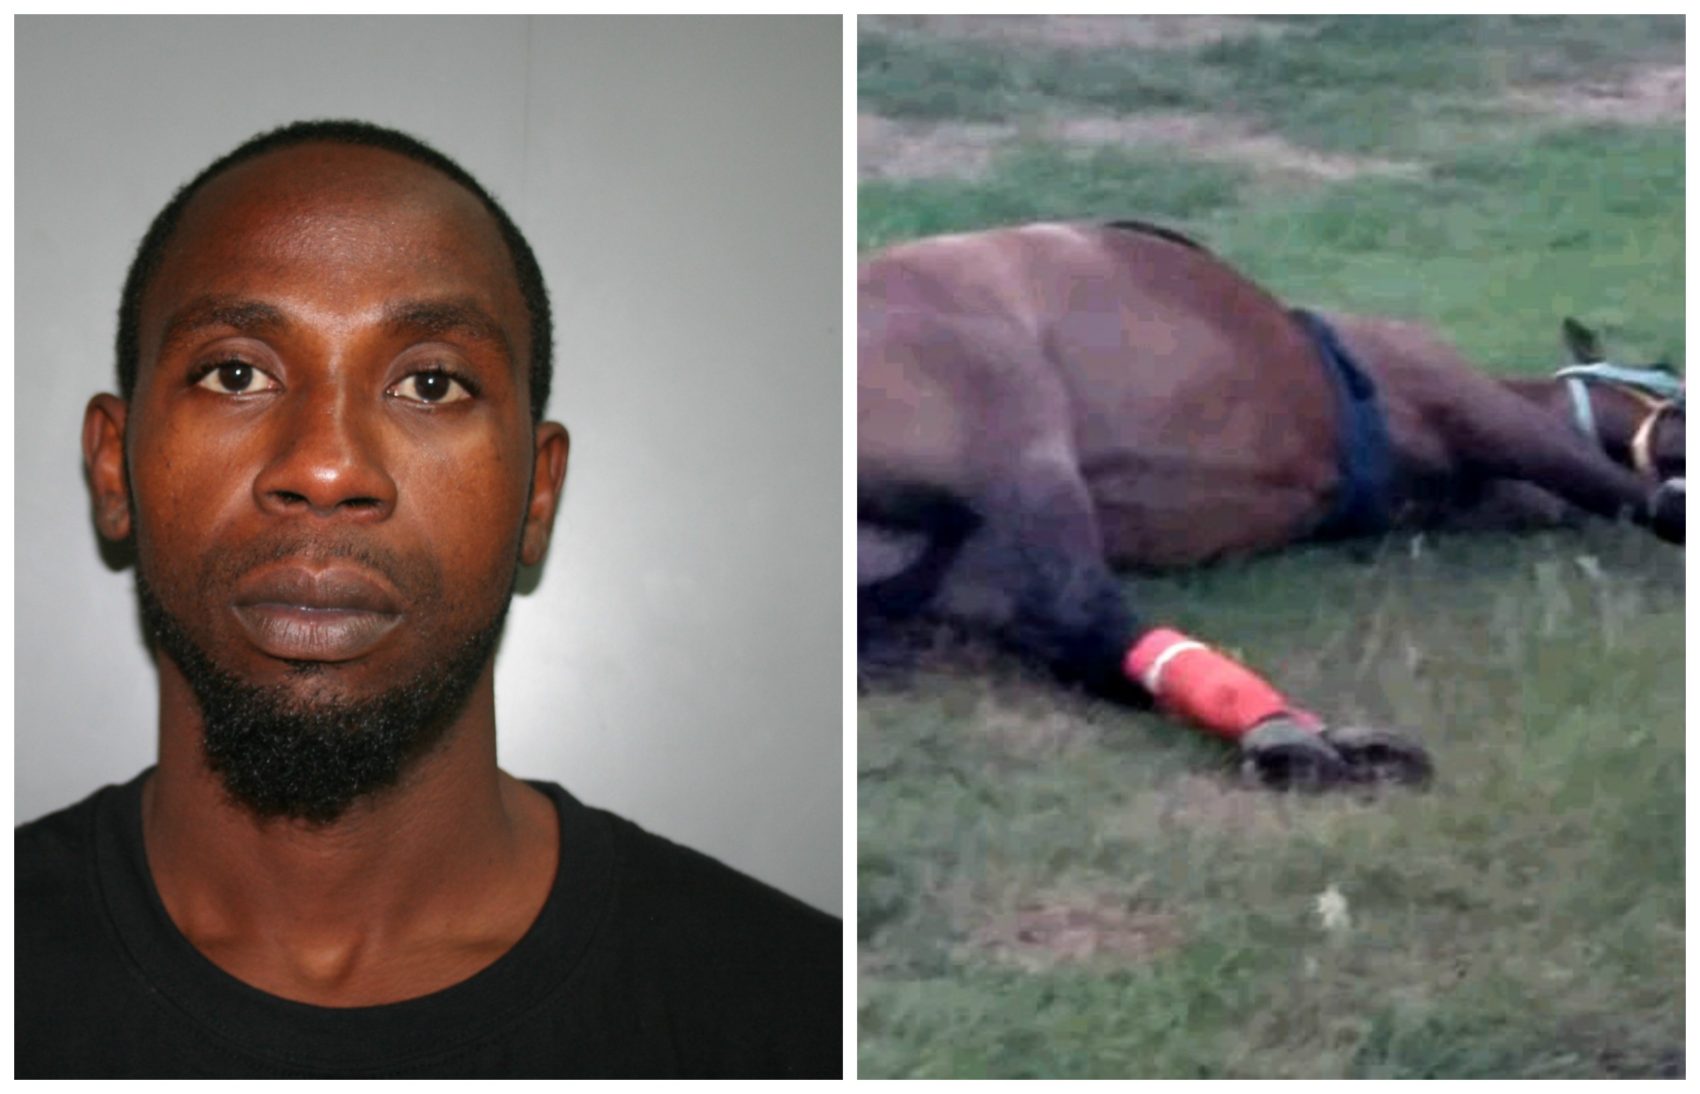 VIPD: St. Croix Man Shoots Horse Multiple Times, Is Arrested For Shooting Man On It